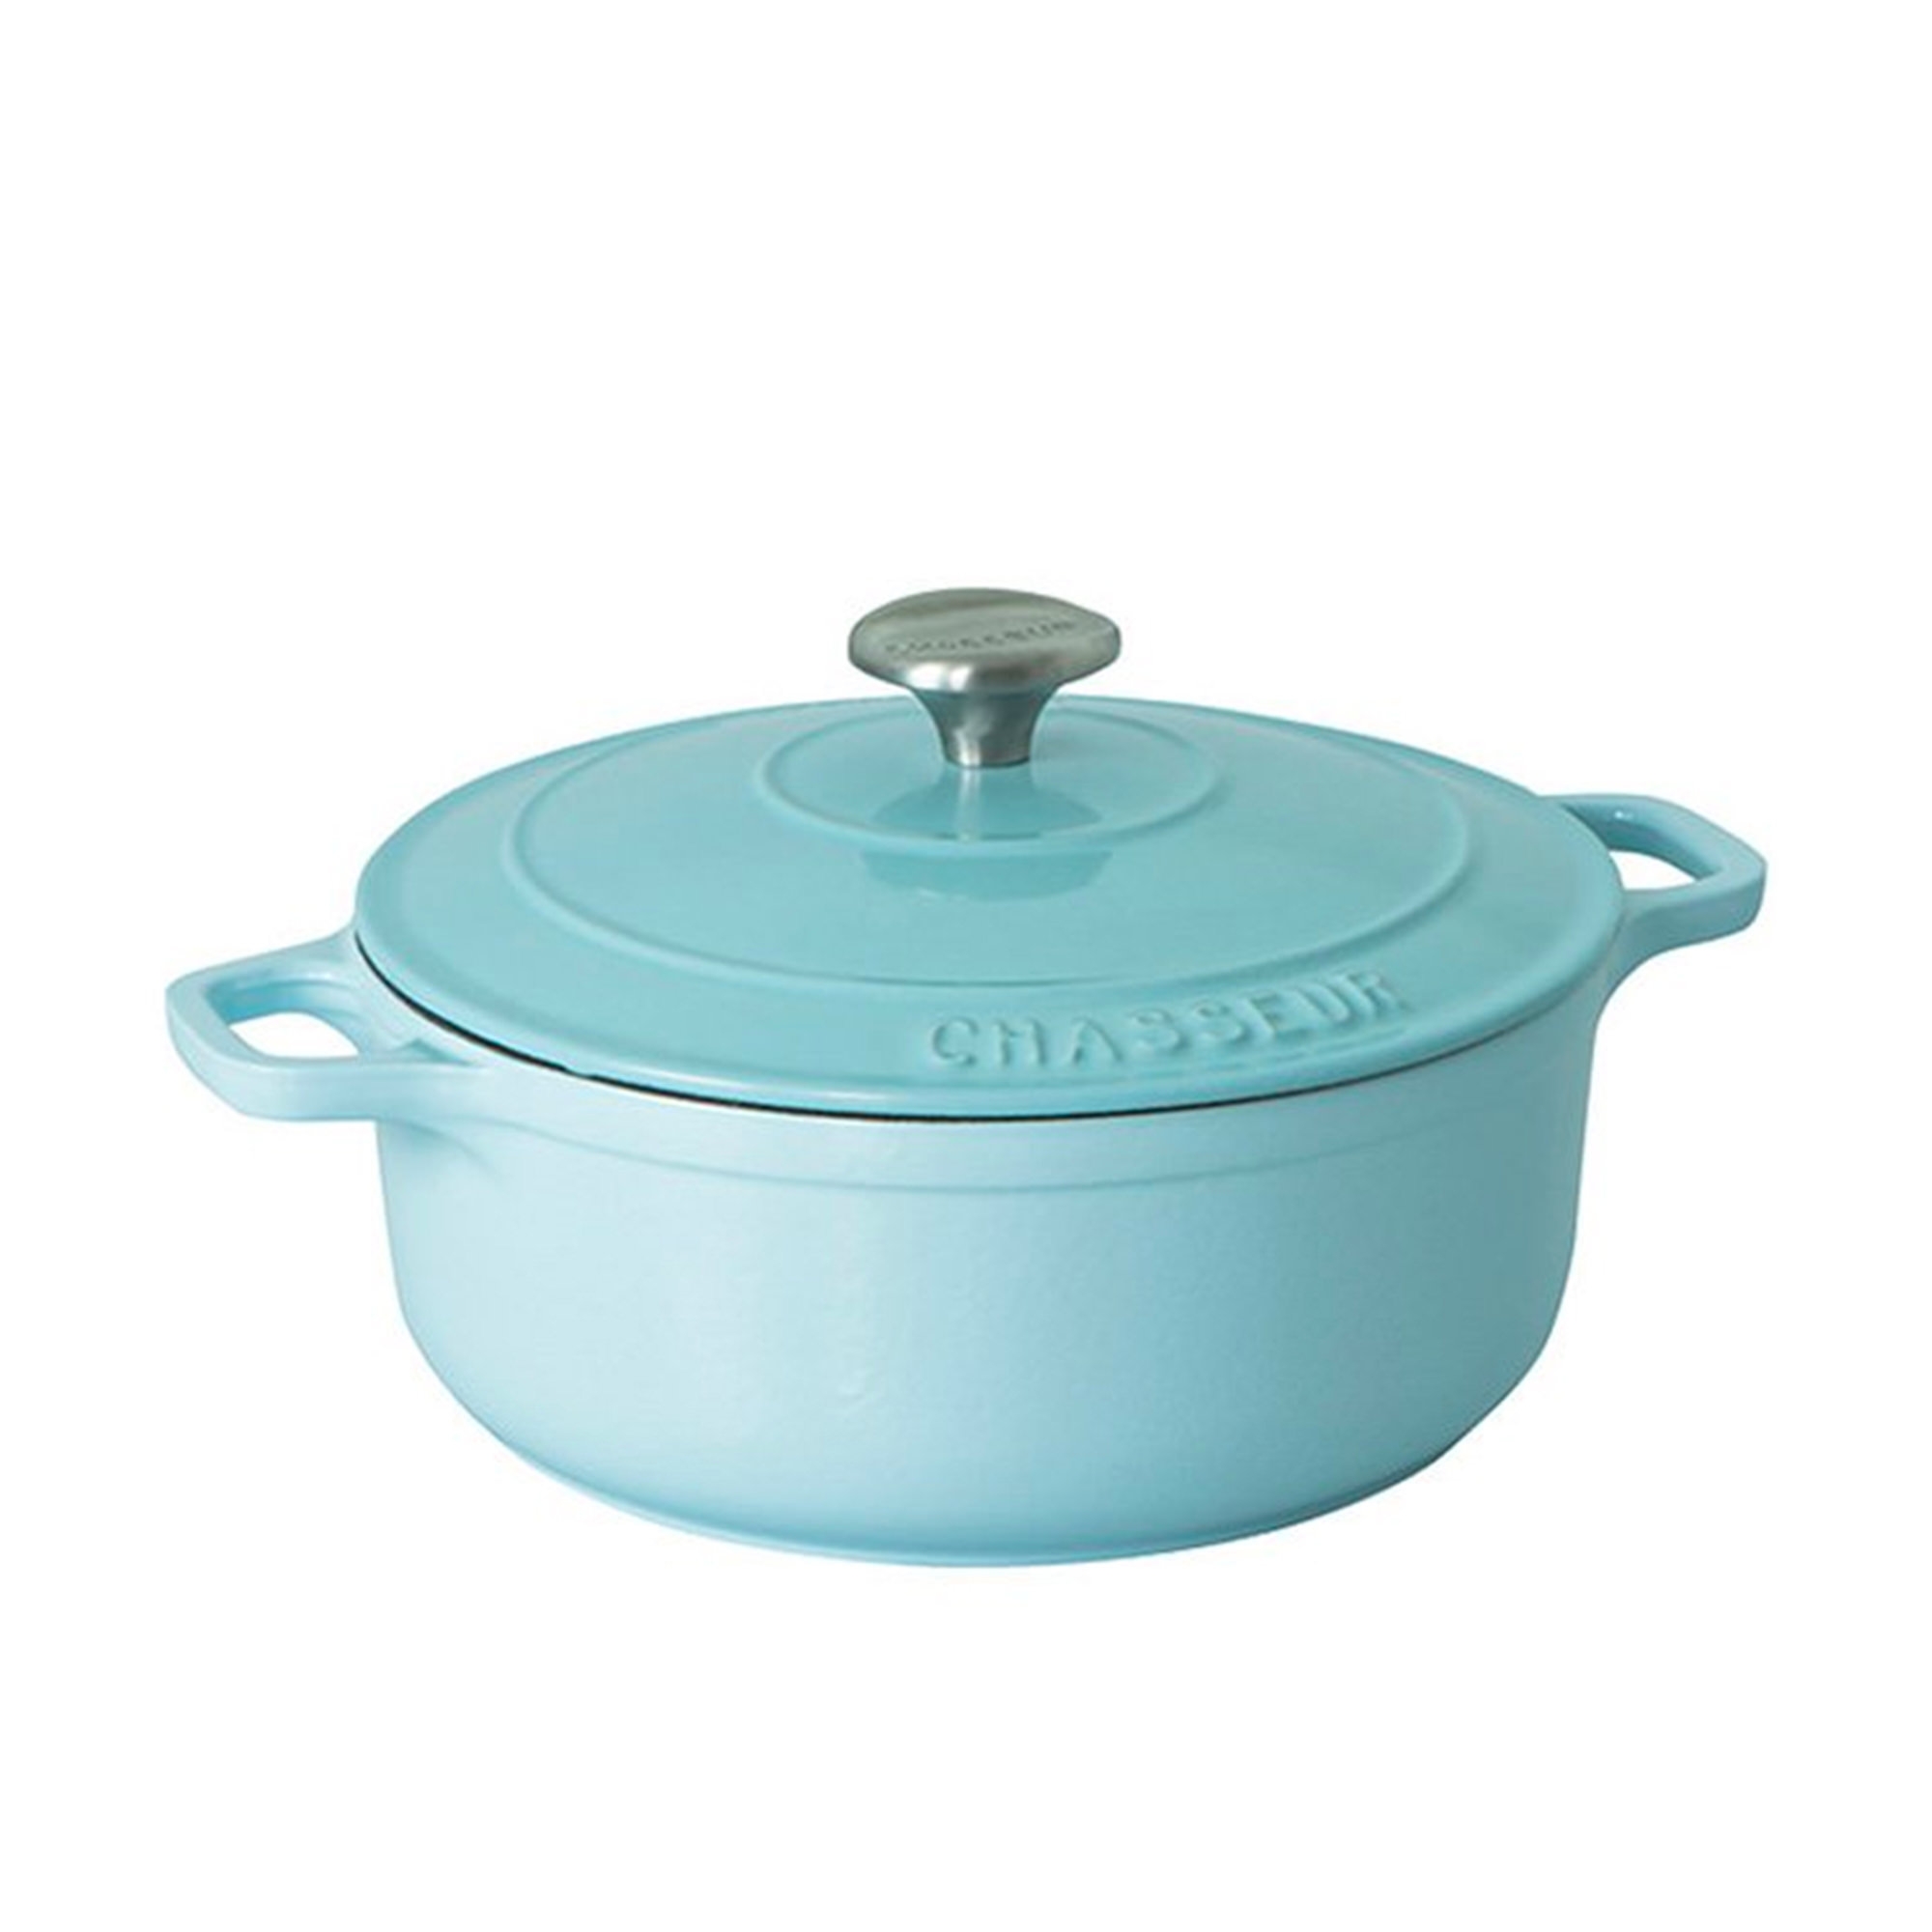 Chasseur Round French Oven 26cm - 5L Duck Egg Blue Image 1